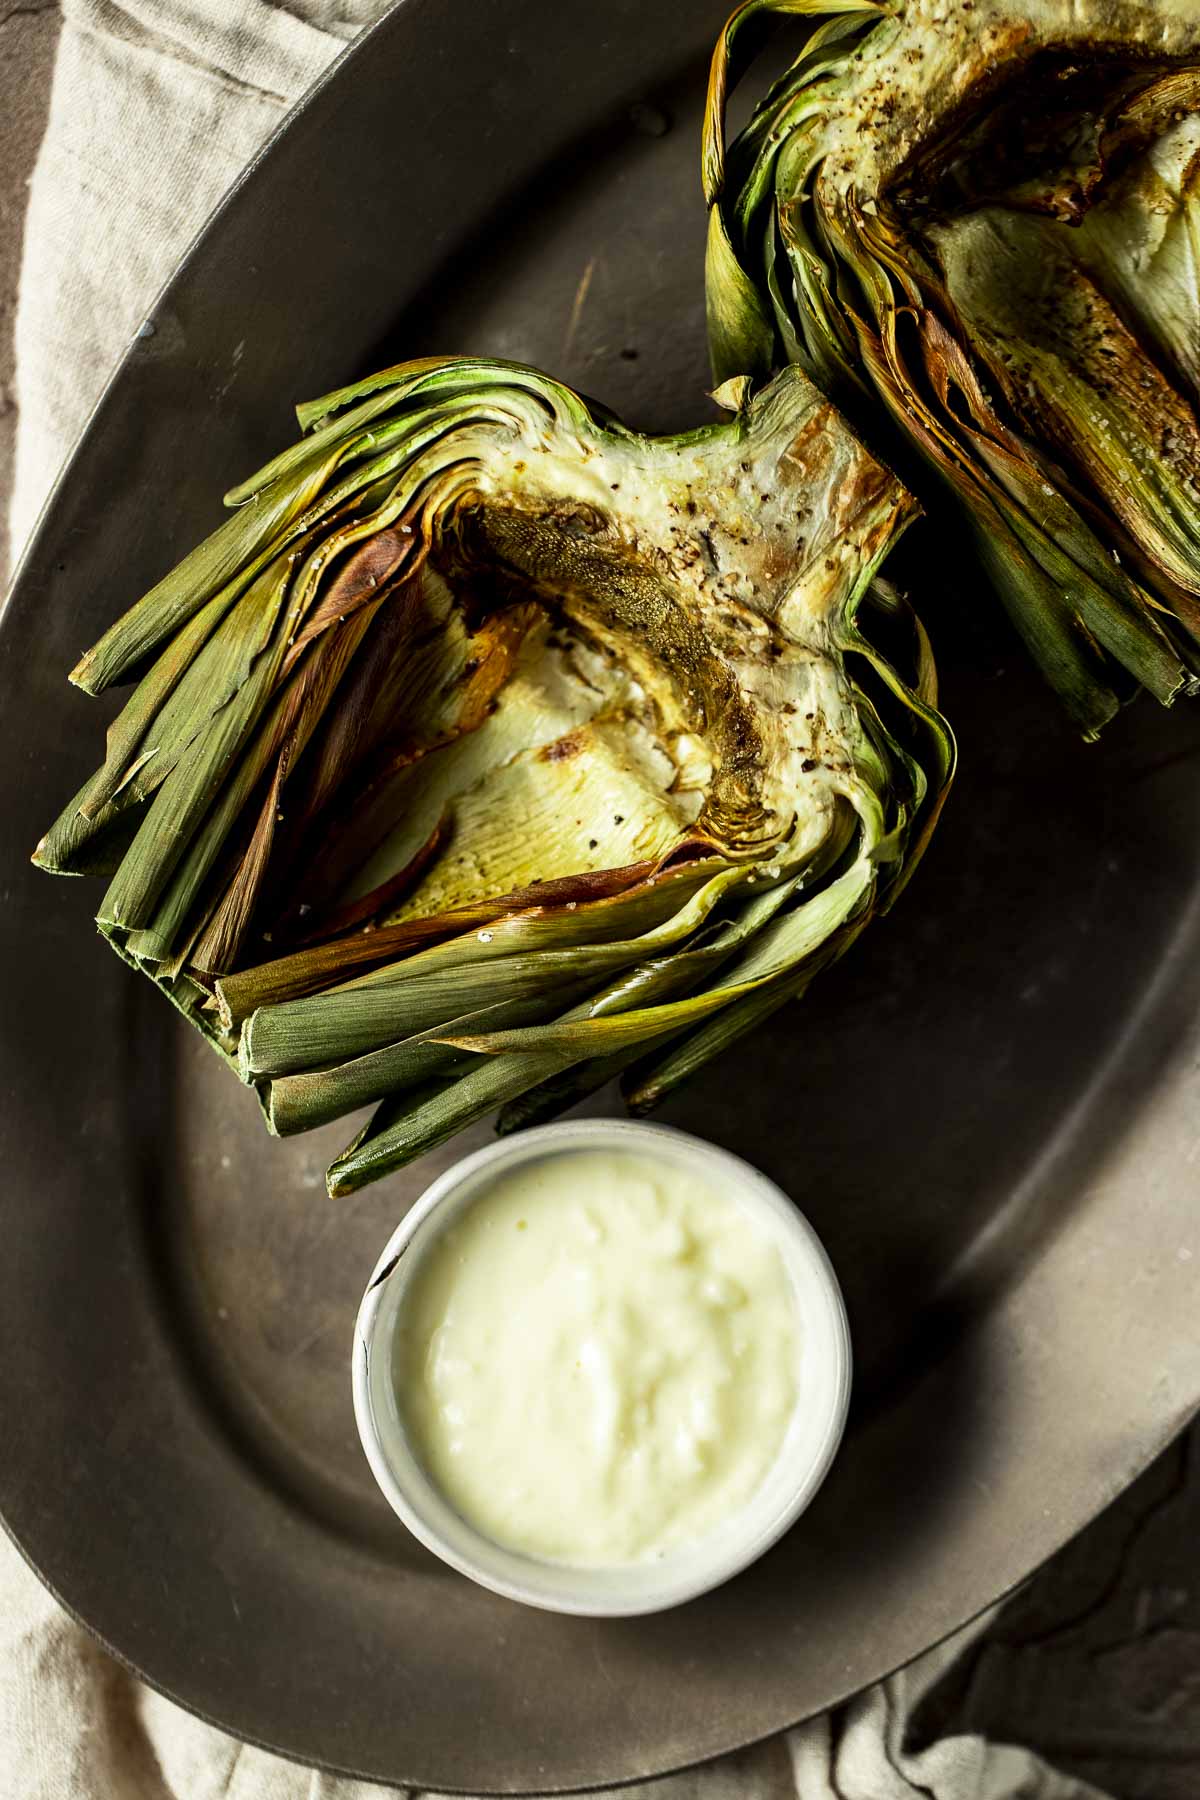 Overhead view of an air fried artichoke half with garlic aioli on the side.